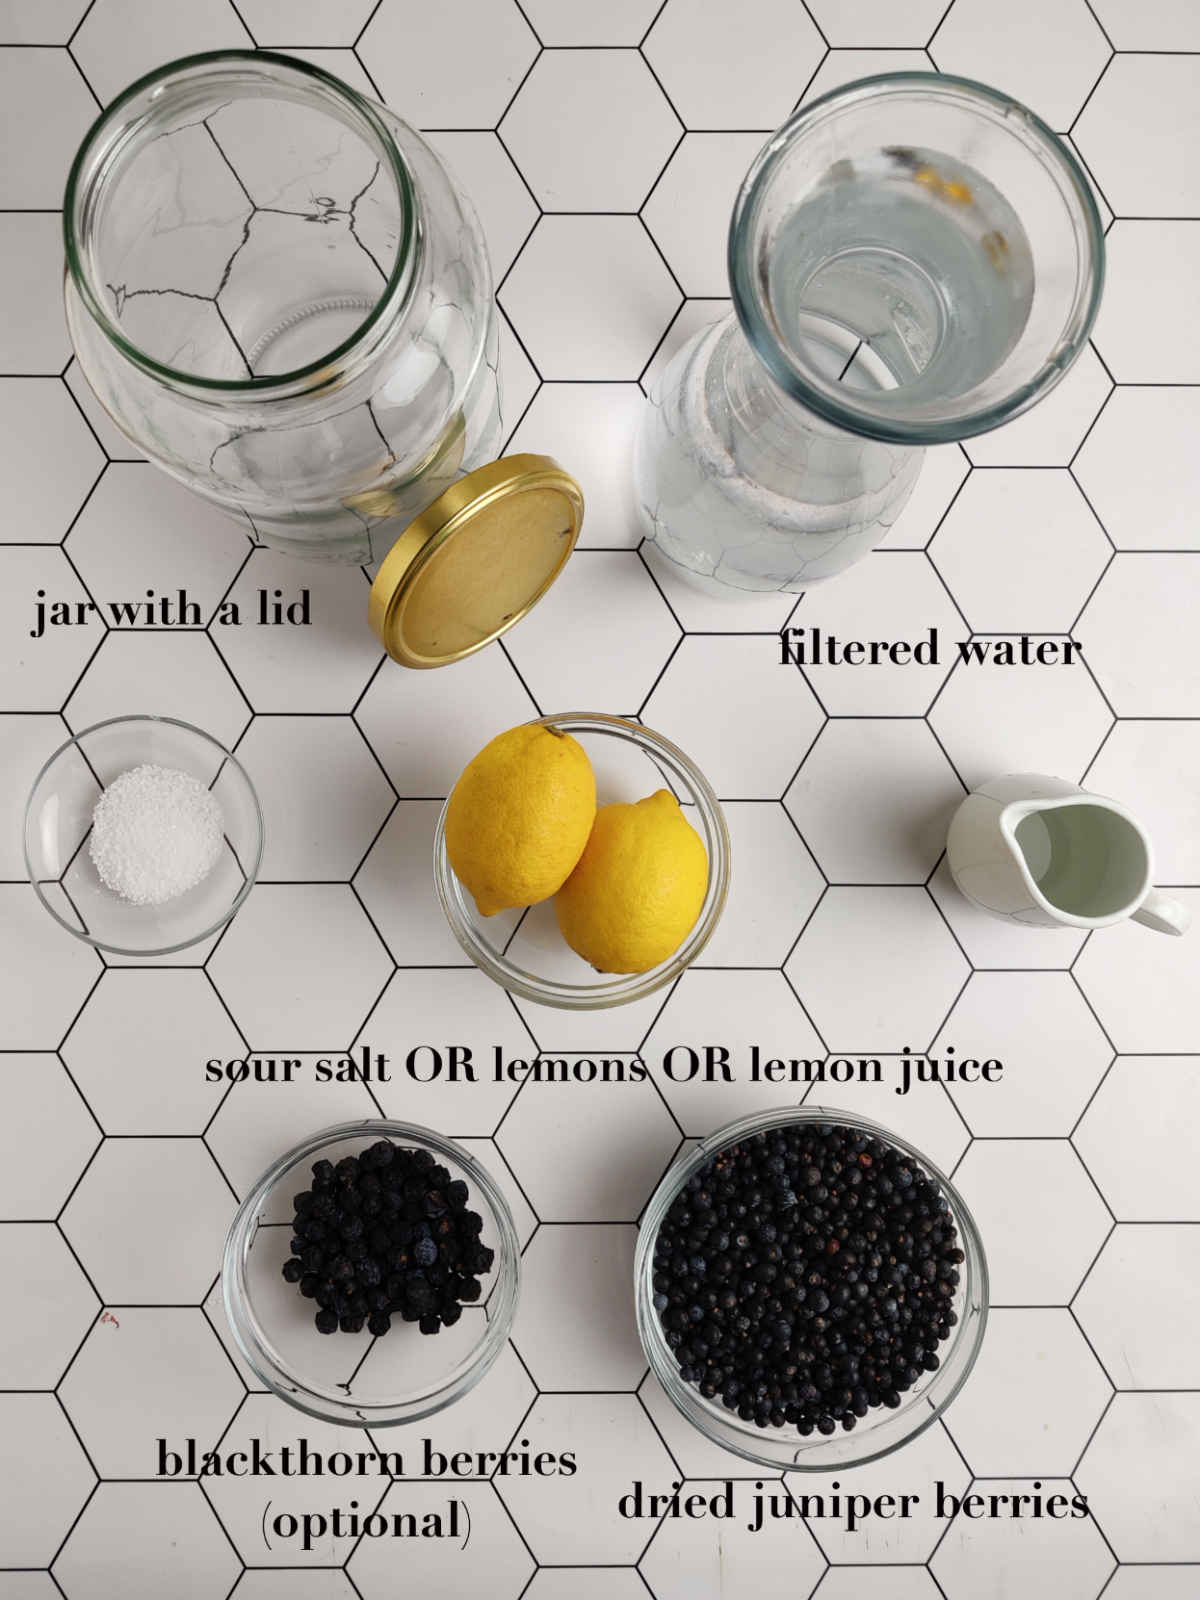 Ingredients for juniper berry juice on a honeycomb background.